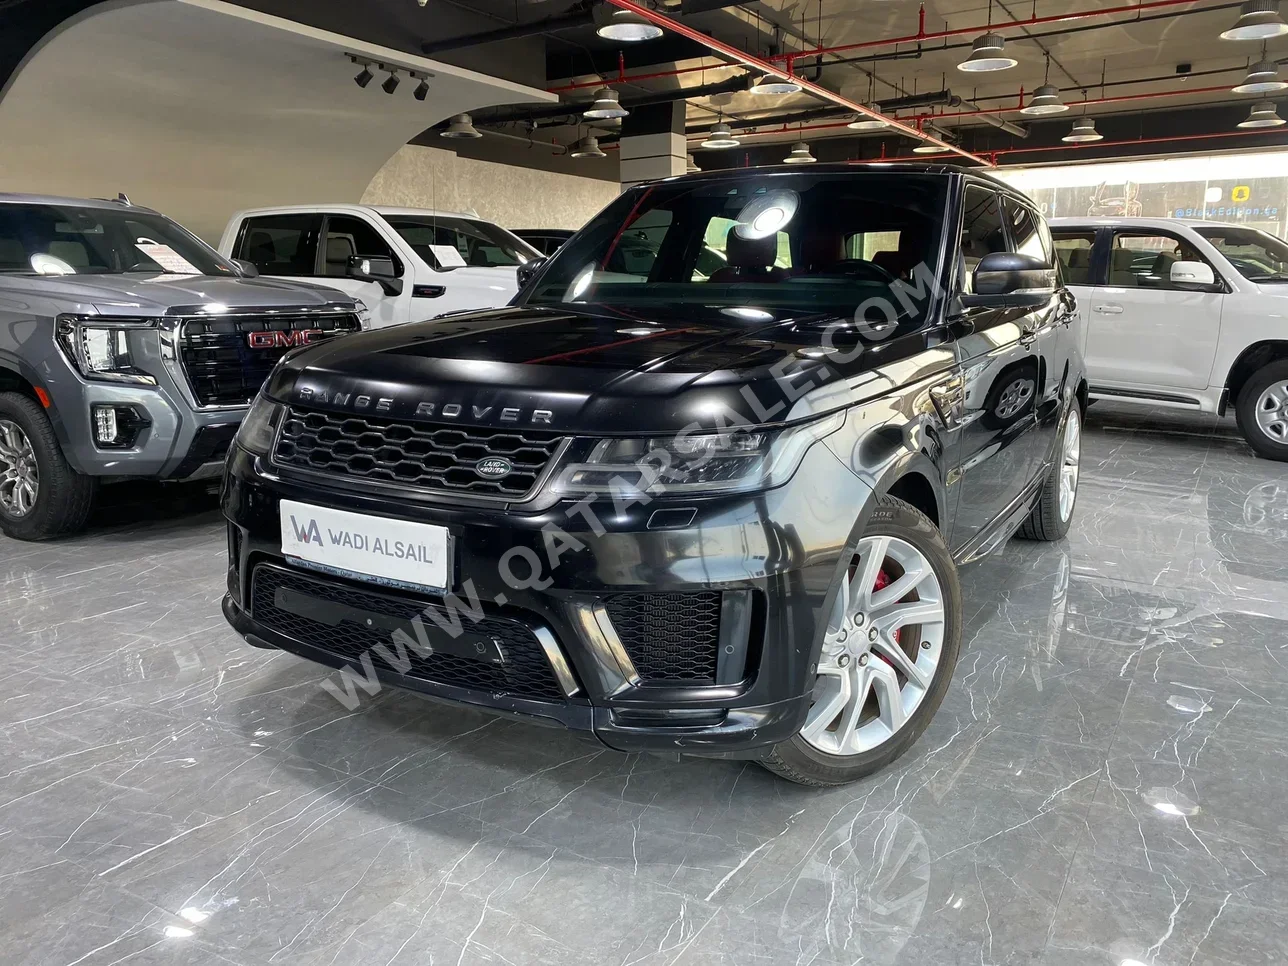 Land Rover  Range Rover  Sport  2018  Automatic  164,000 Km  8 Cylinder  Four Wheel Drive (4WD)  SUV  Black